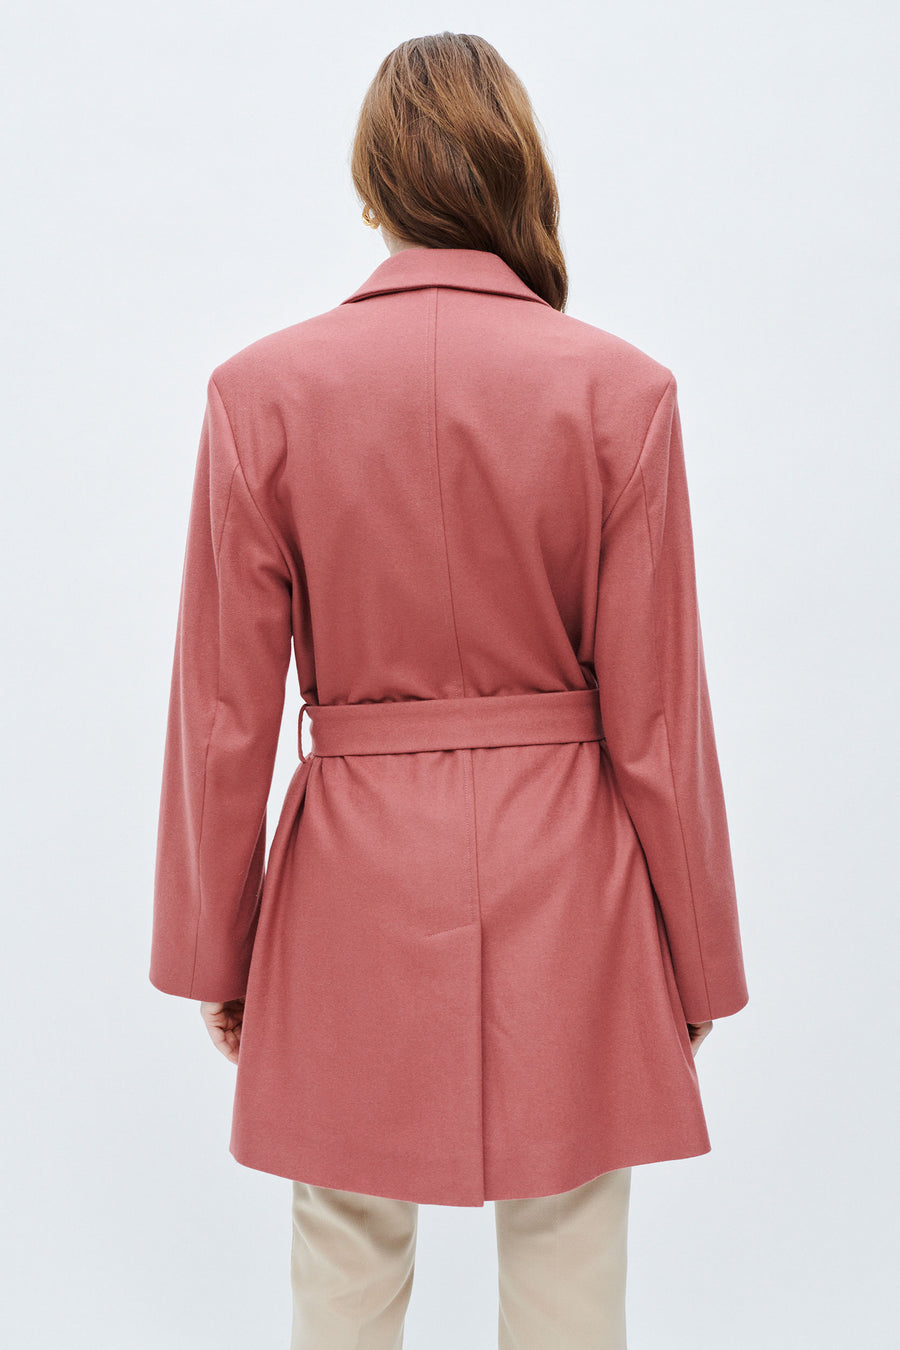 AQVAROSSA Asilah loden jacket in coral colour back view